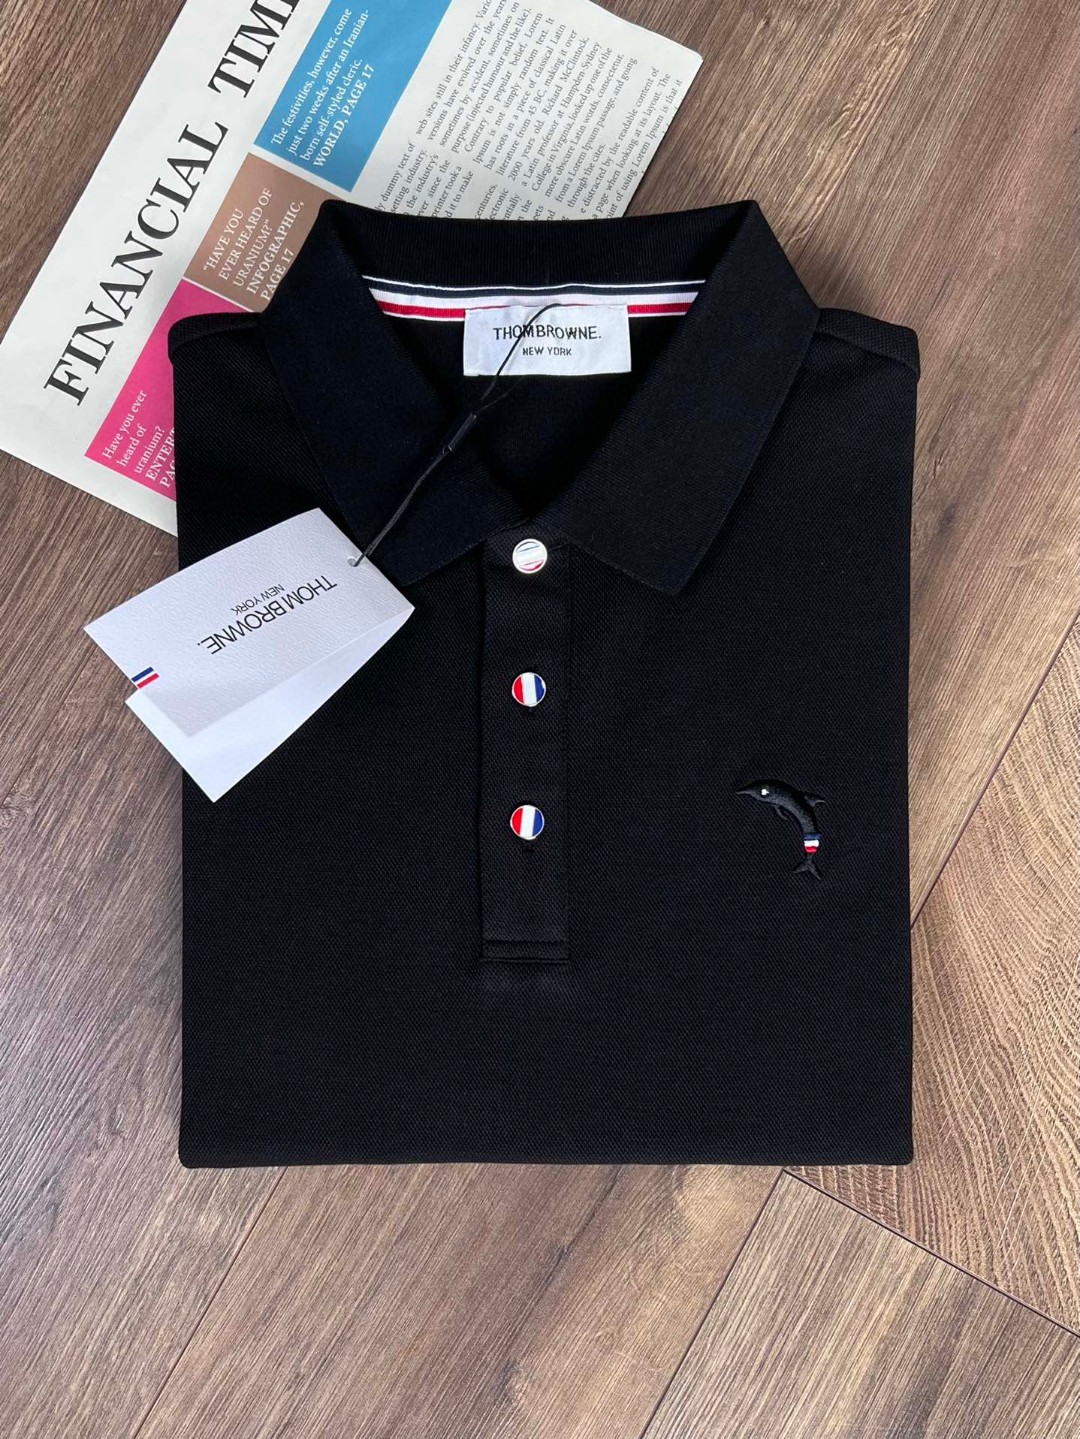 Thom Browne Clothing Polo T-Shirt High Quality 1:1 Replica
 Embroidery Men Cotton Fall/Winter Collection Fashion Long Sleeve